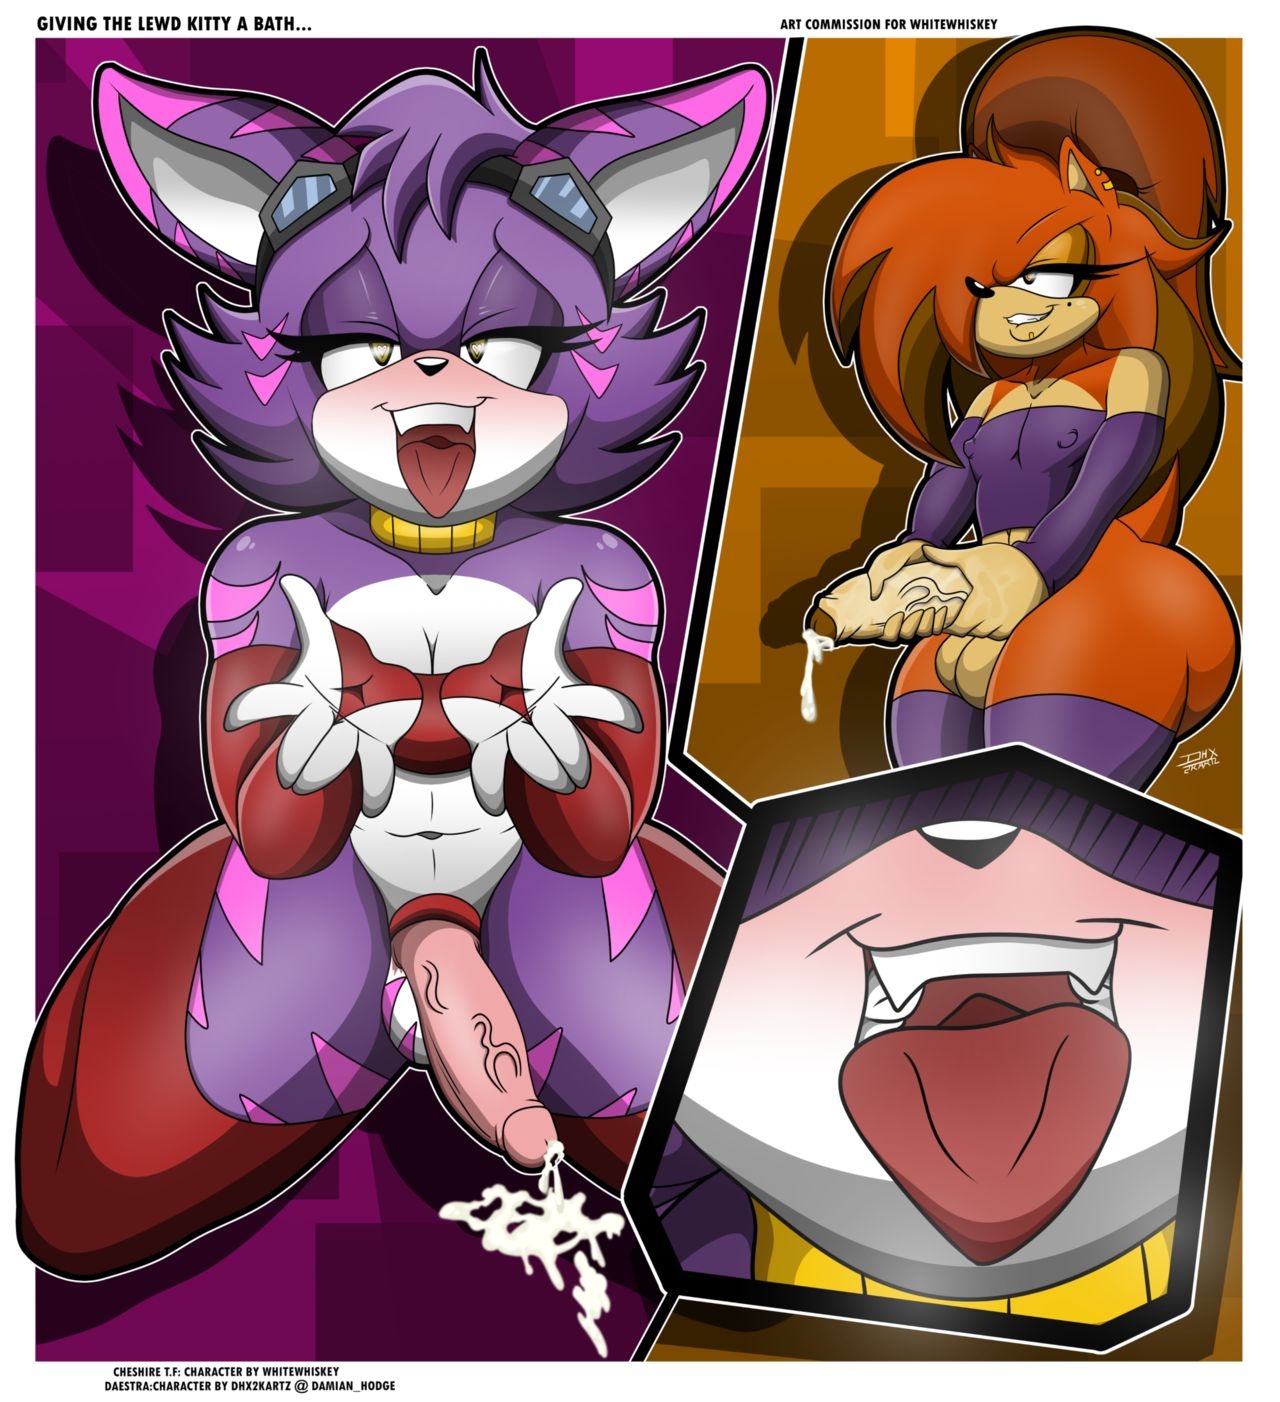 [Damian Hodge] The Sissification of a Lewd Kitty 32